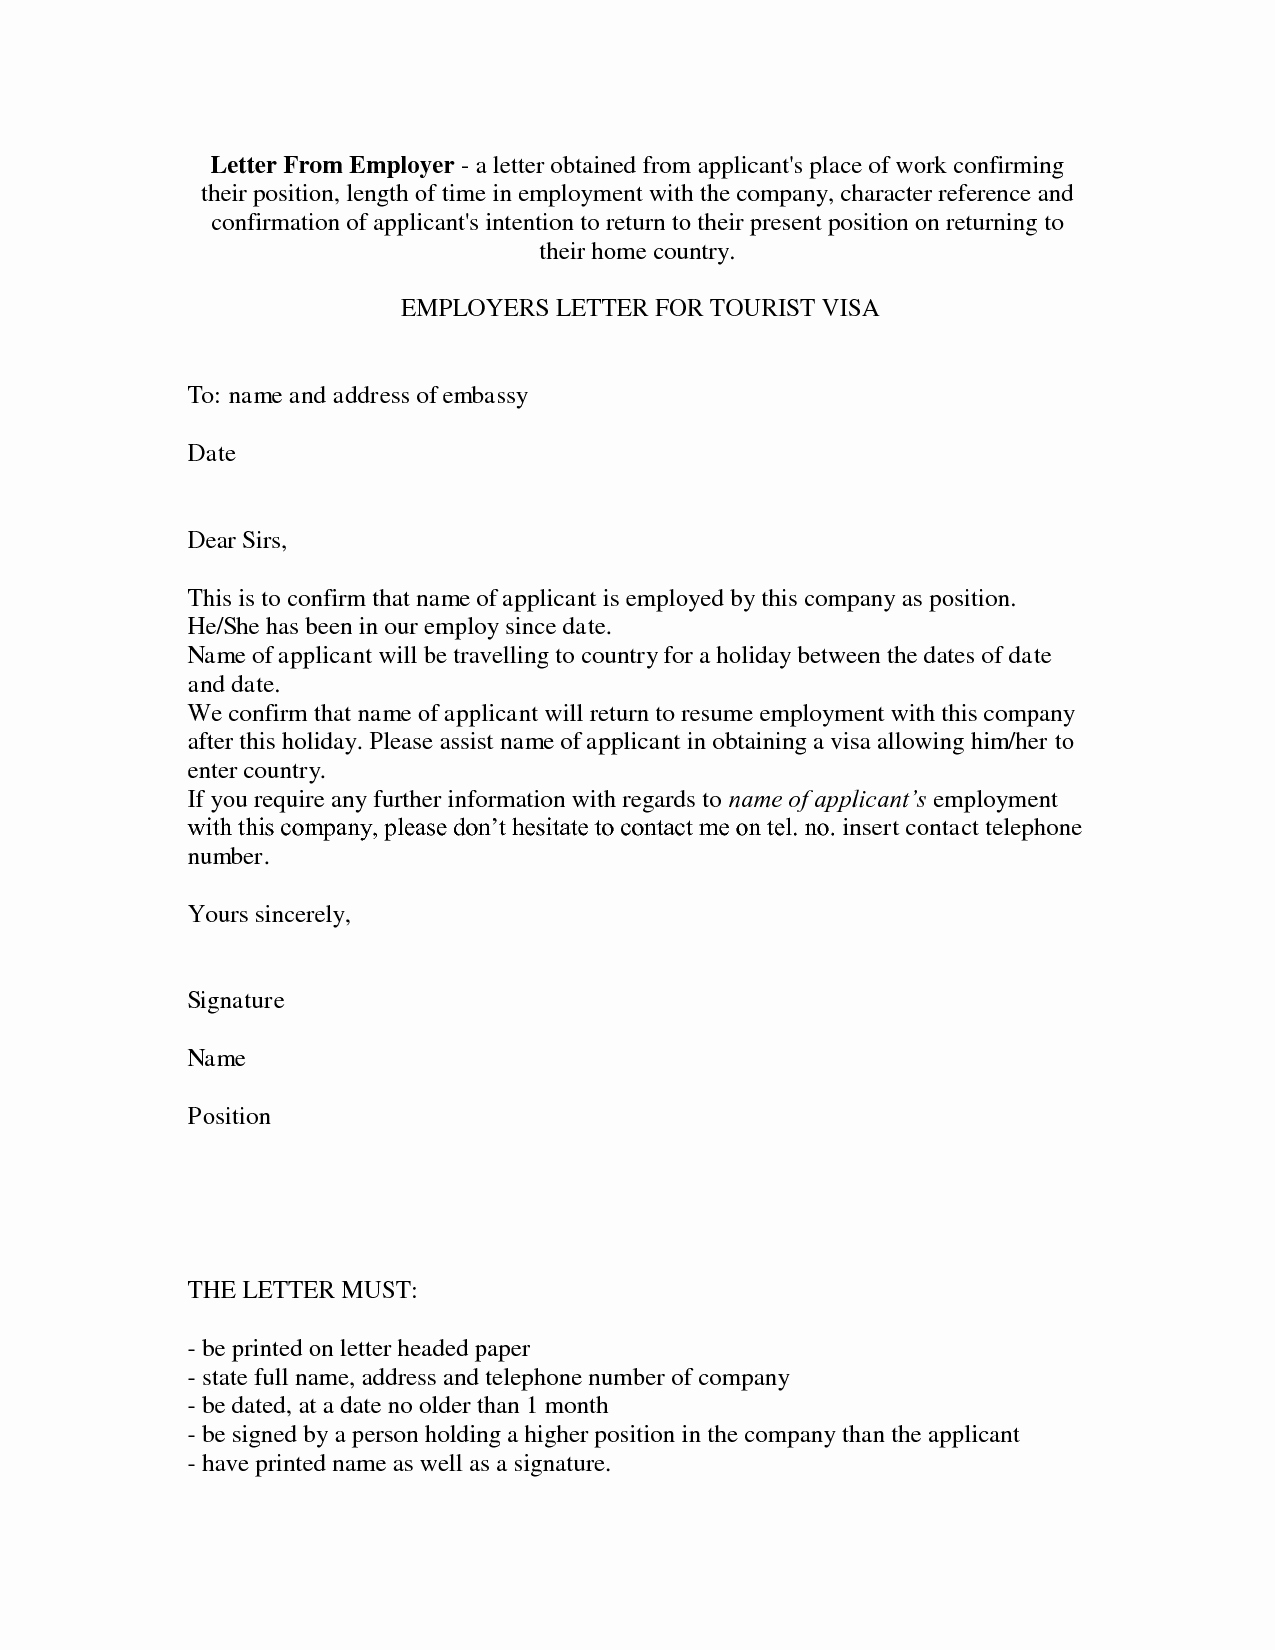 Recommendation Letter for Visa New Hk Academic Writing Consultancy Ghostwriting Admission